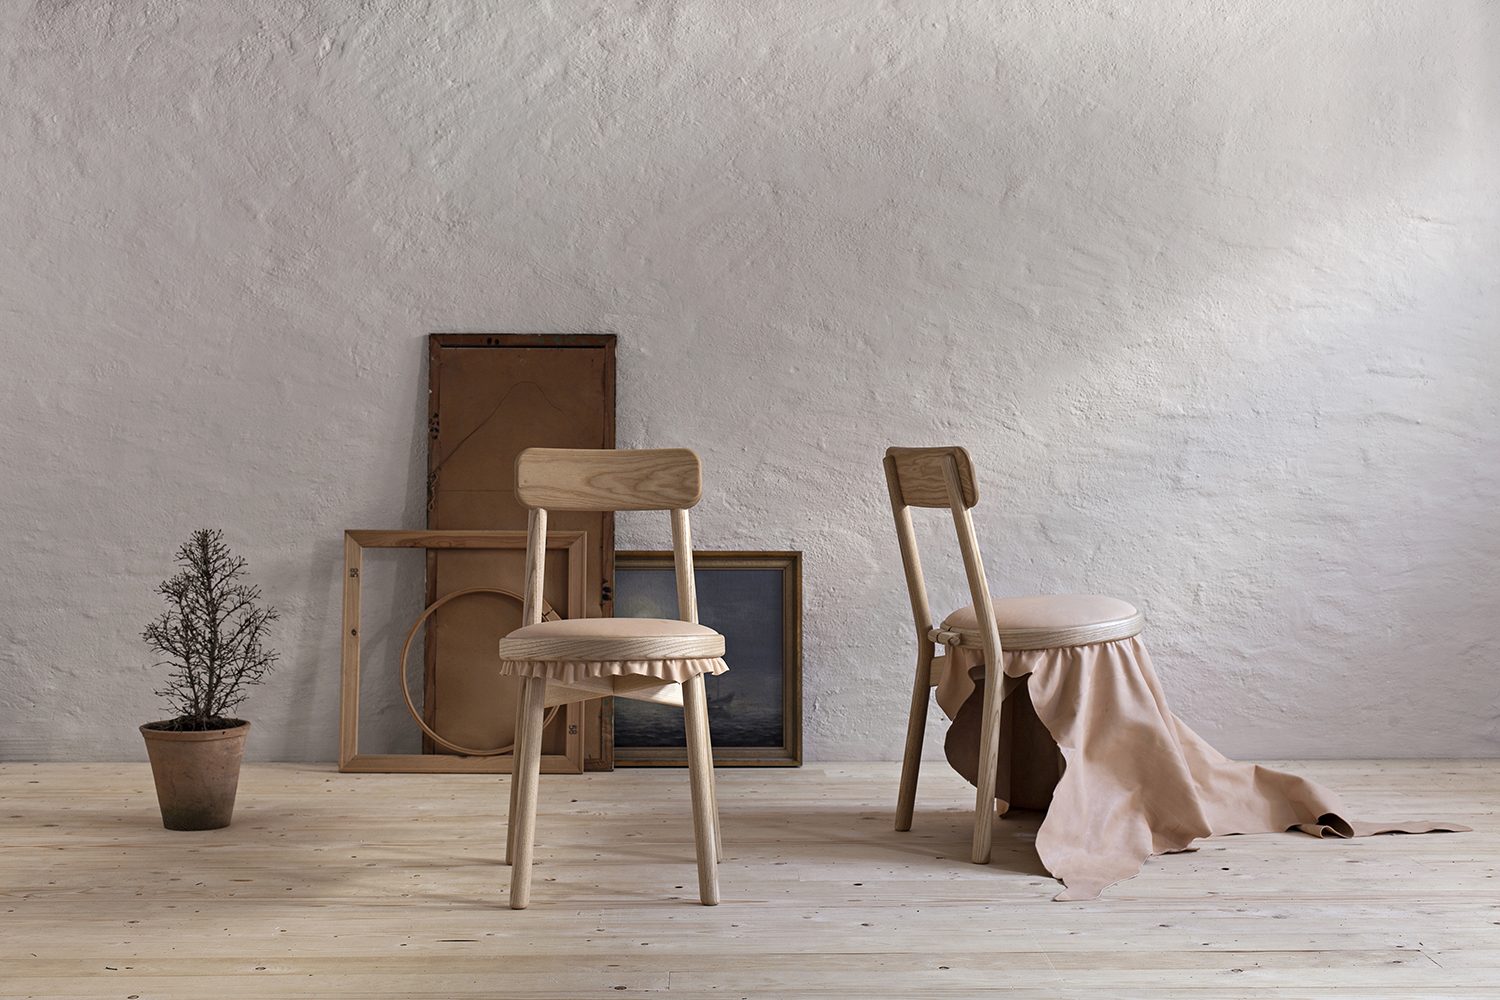 Canvas Chair by Stoft Studio